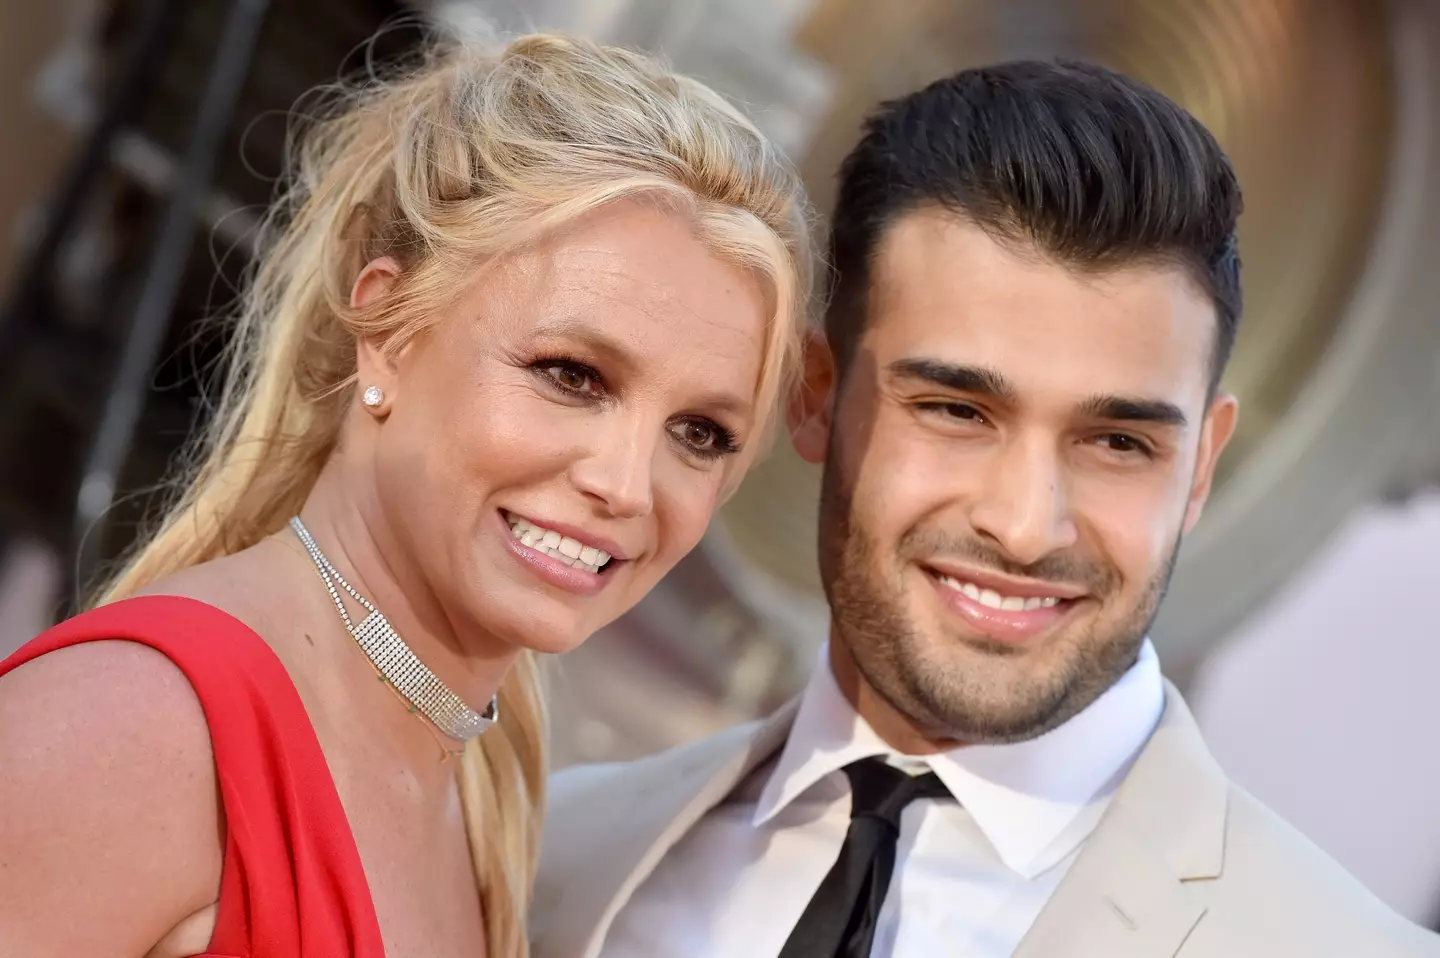 Britney Spears has recently split from her third husband, Sam Asghari.